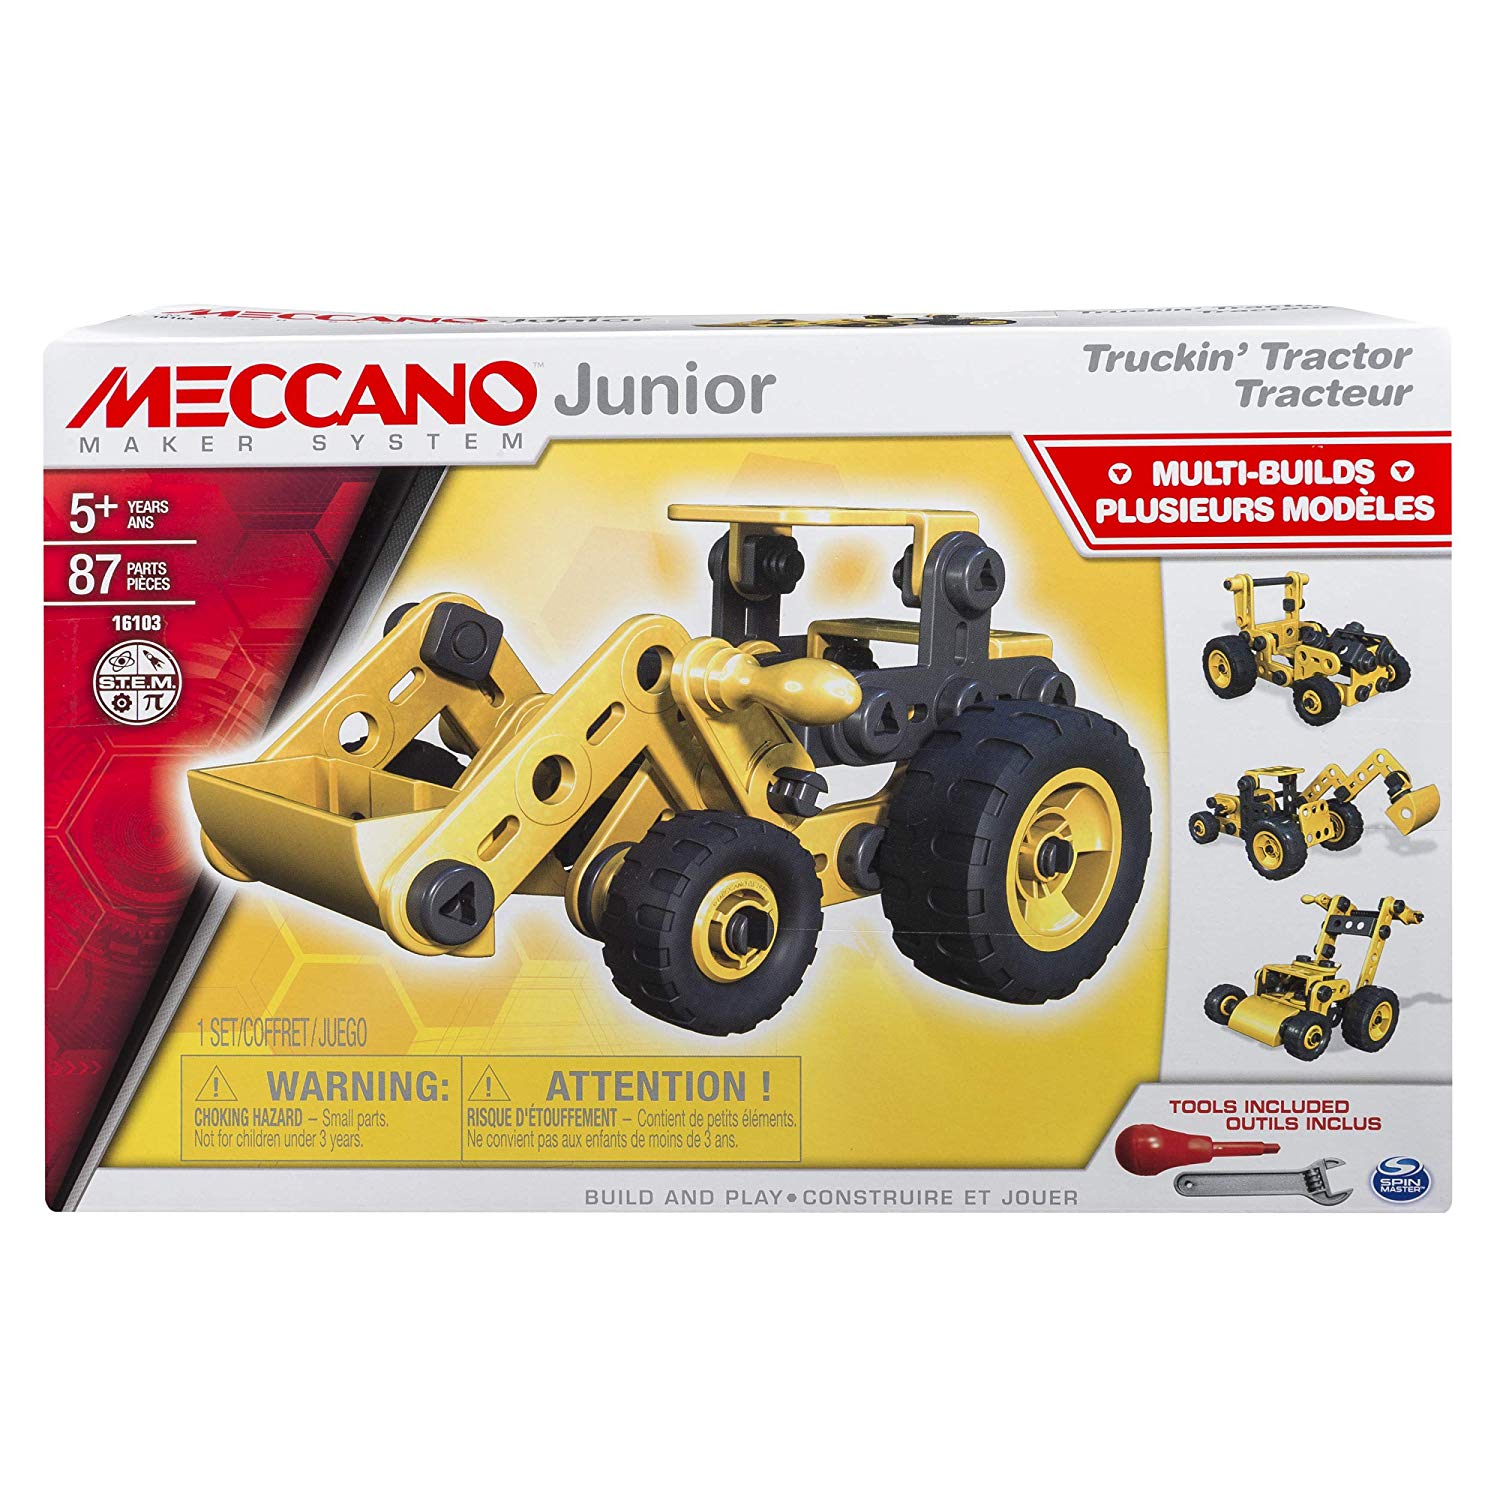 meccano for 7 year olds